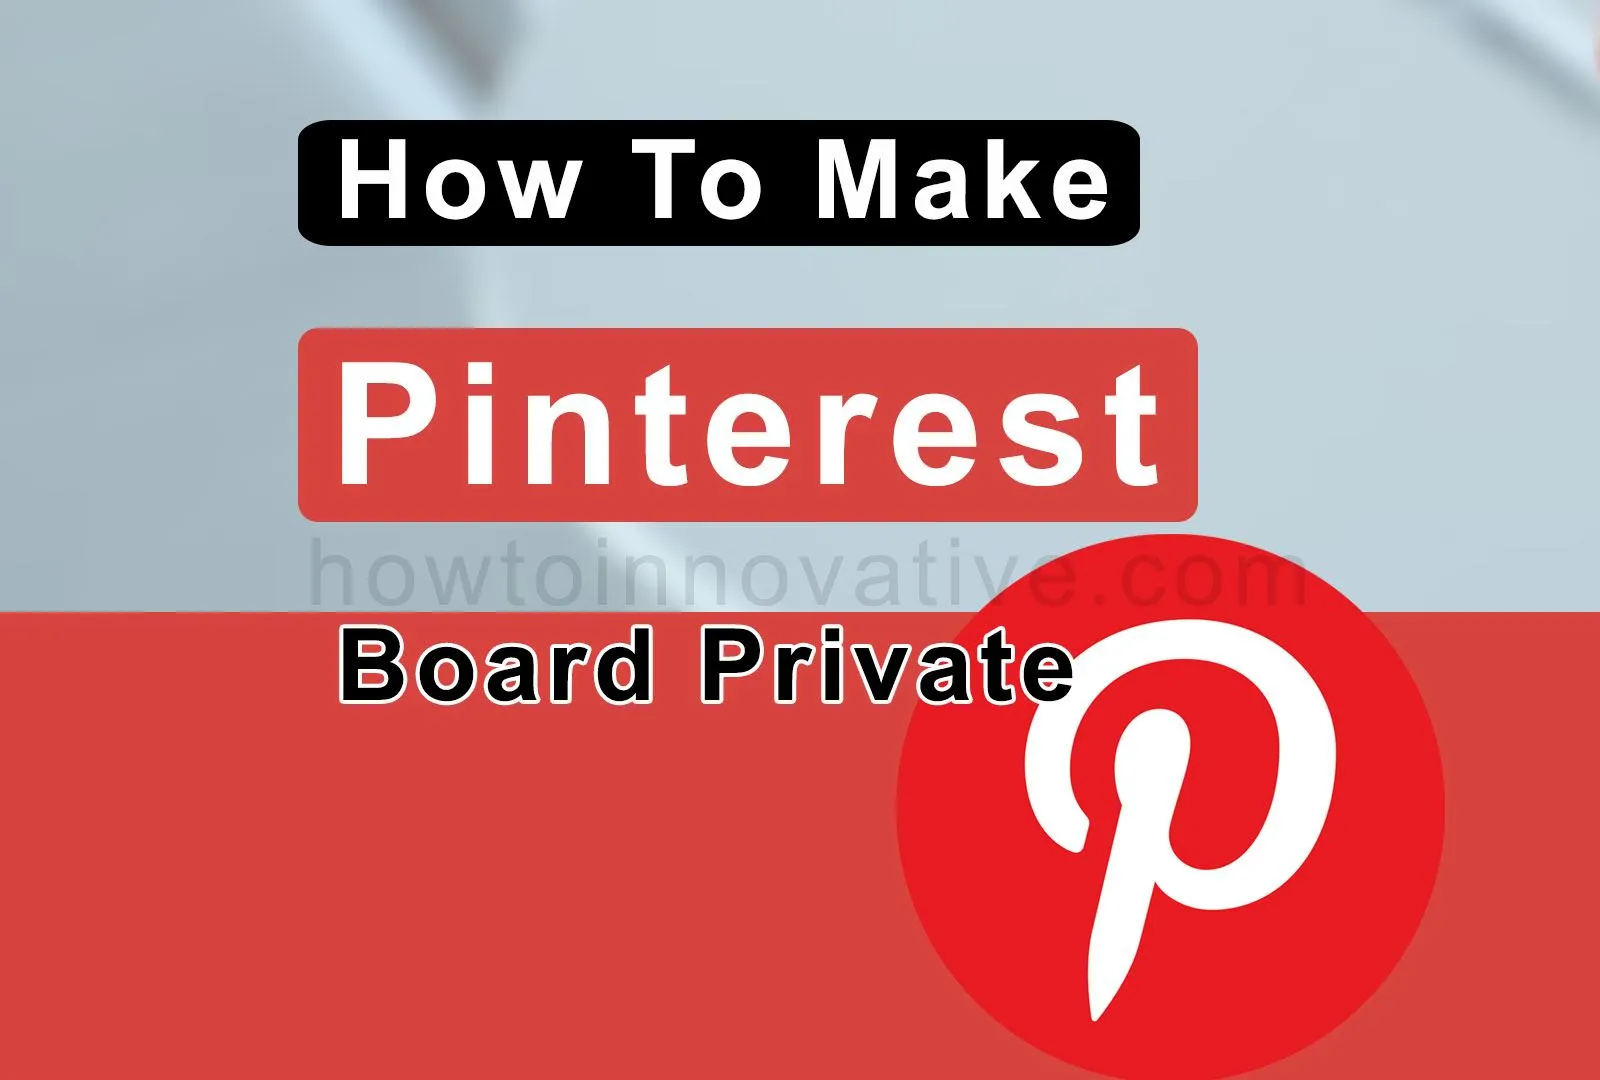 How To Make Pinterest Board Private